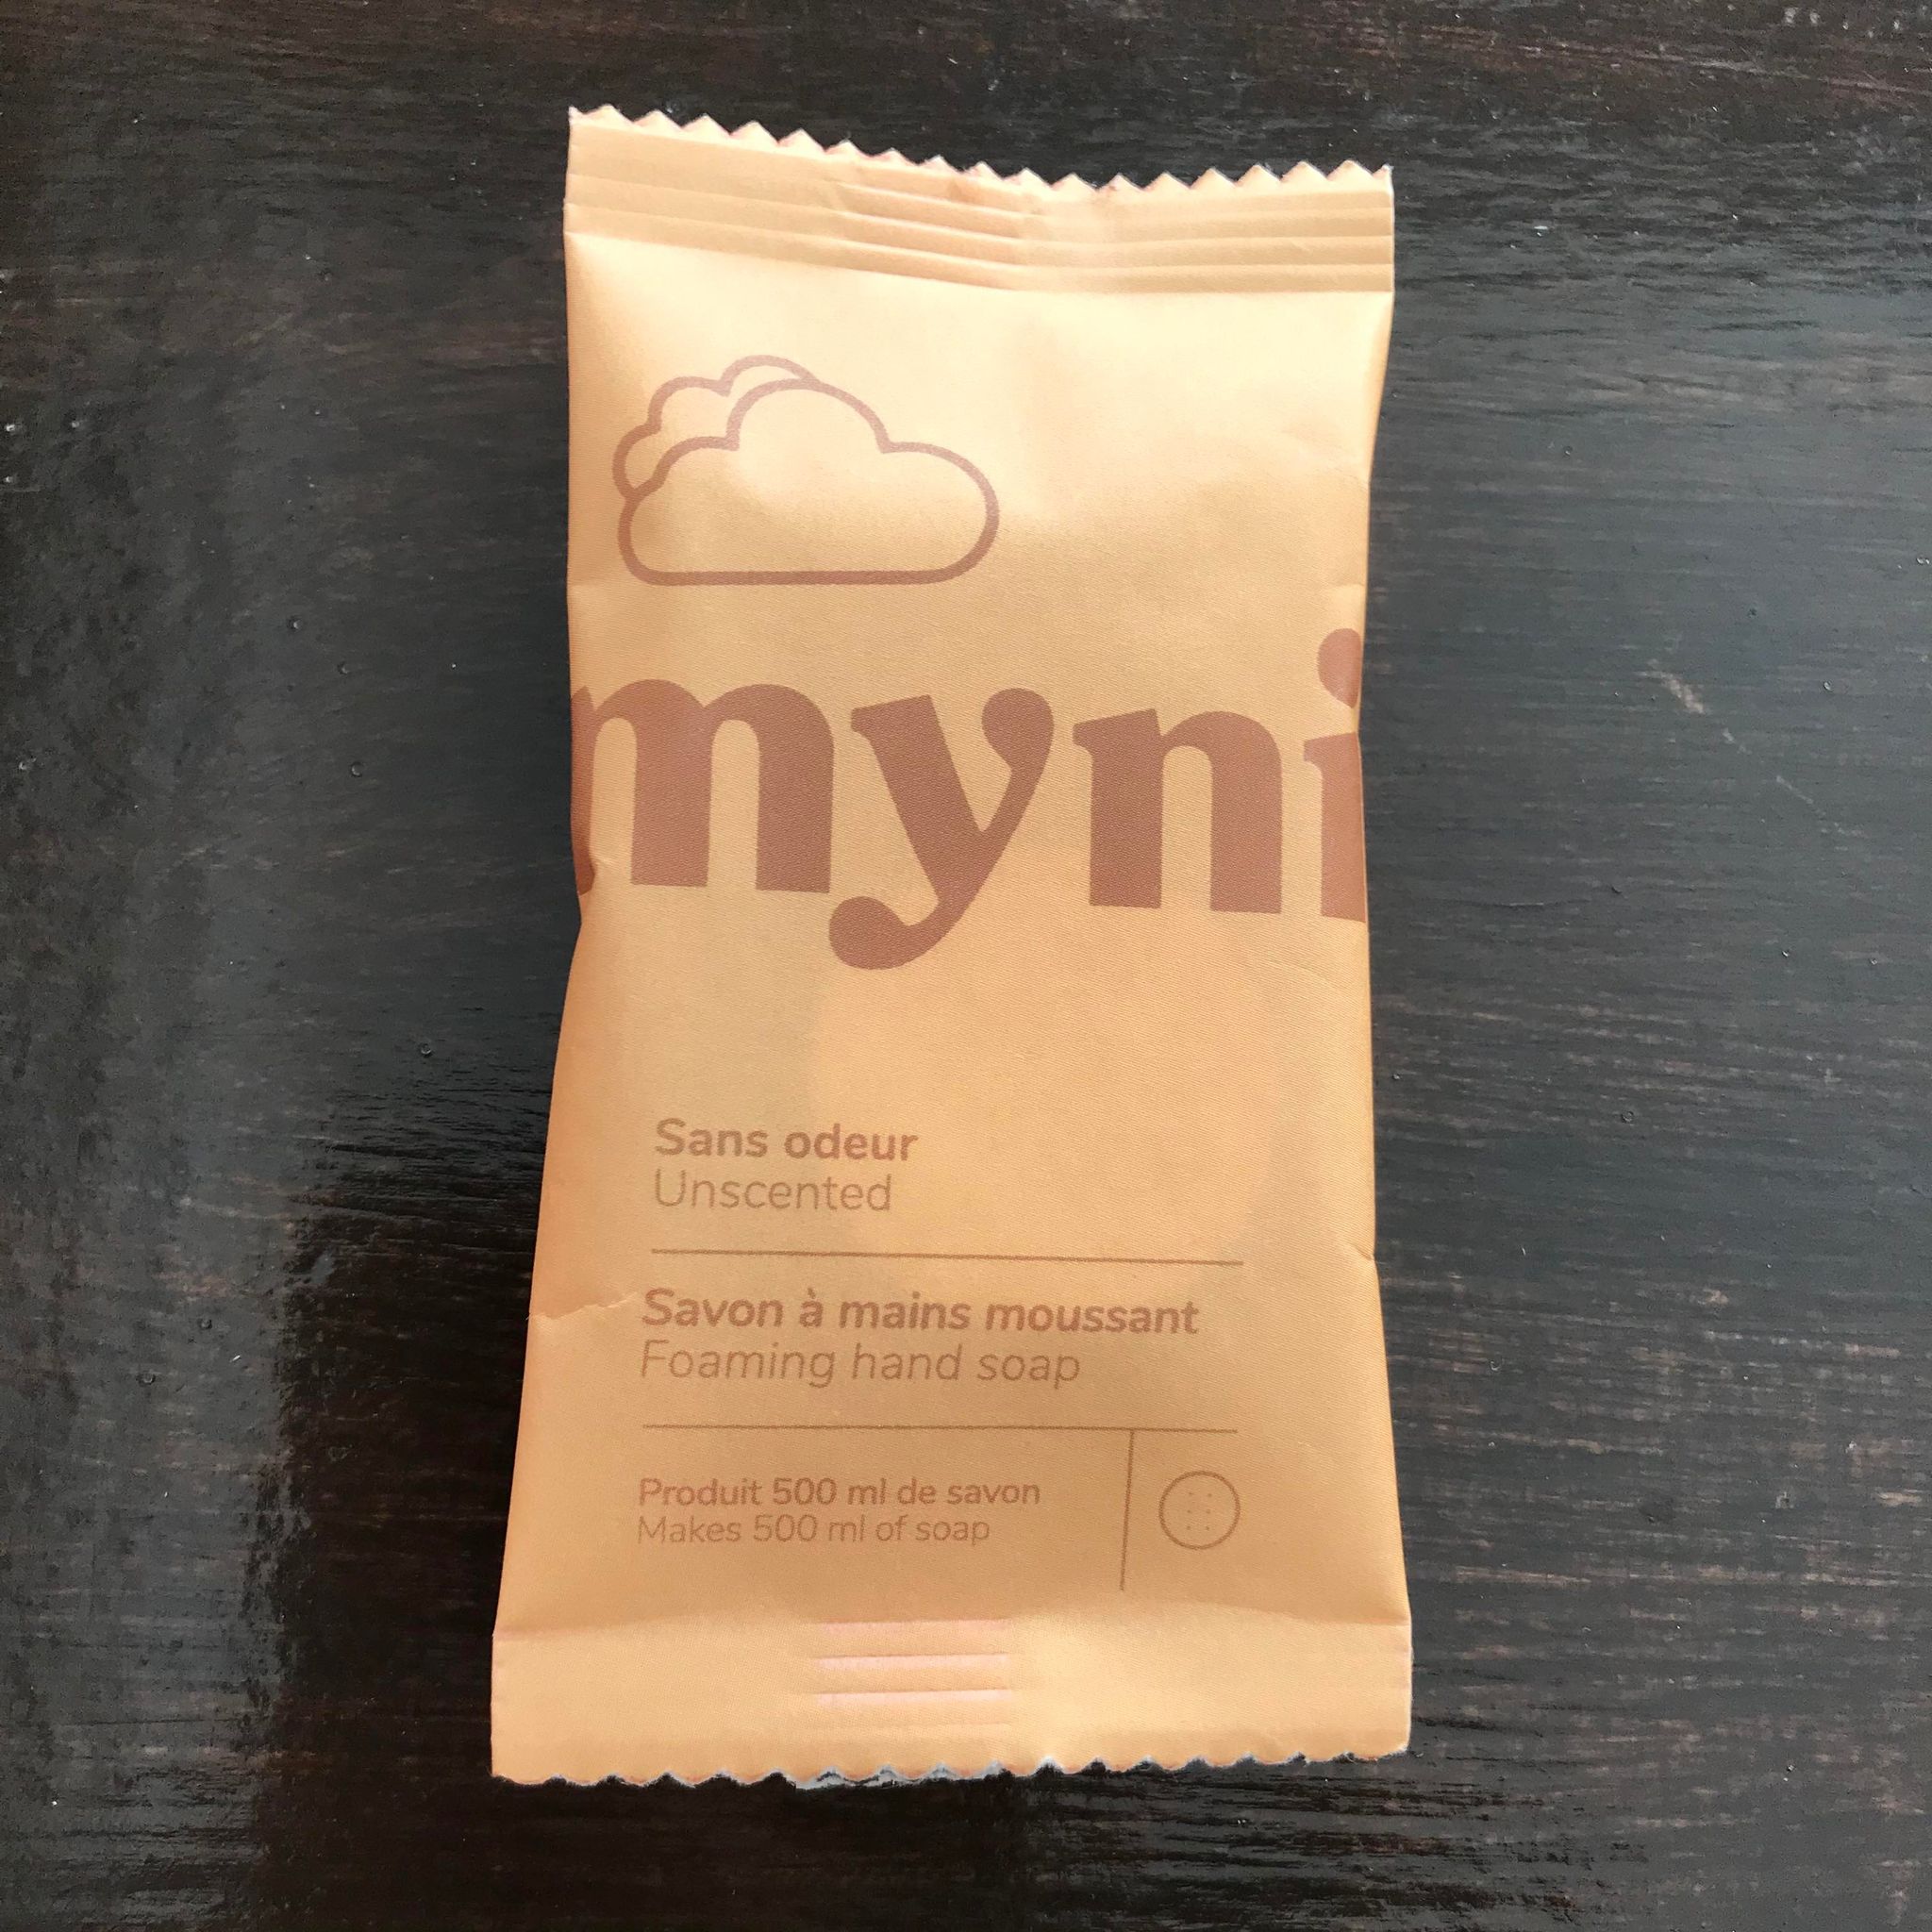 unscented foaming hand soap concentrate in compostable pouch made in canada by myni